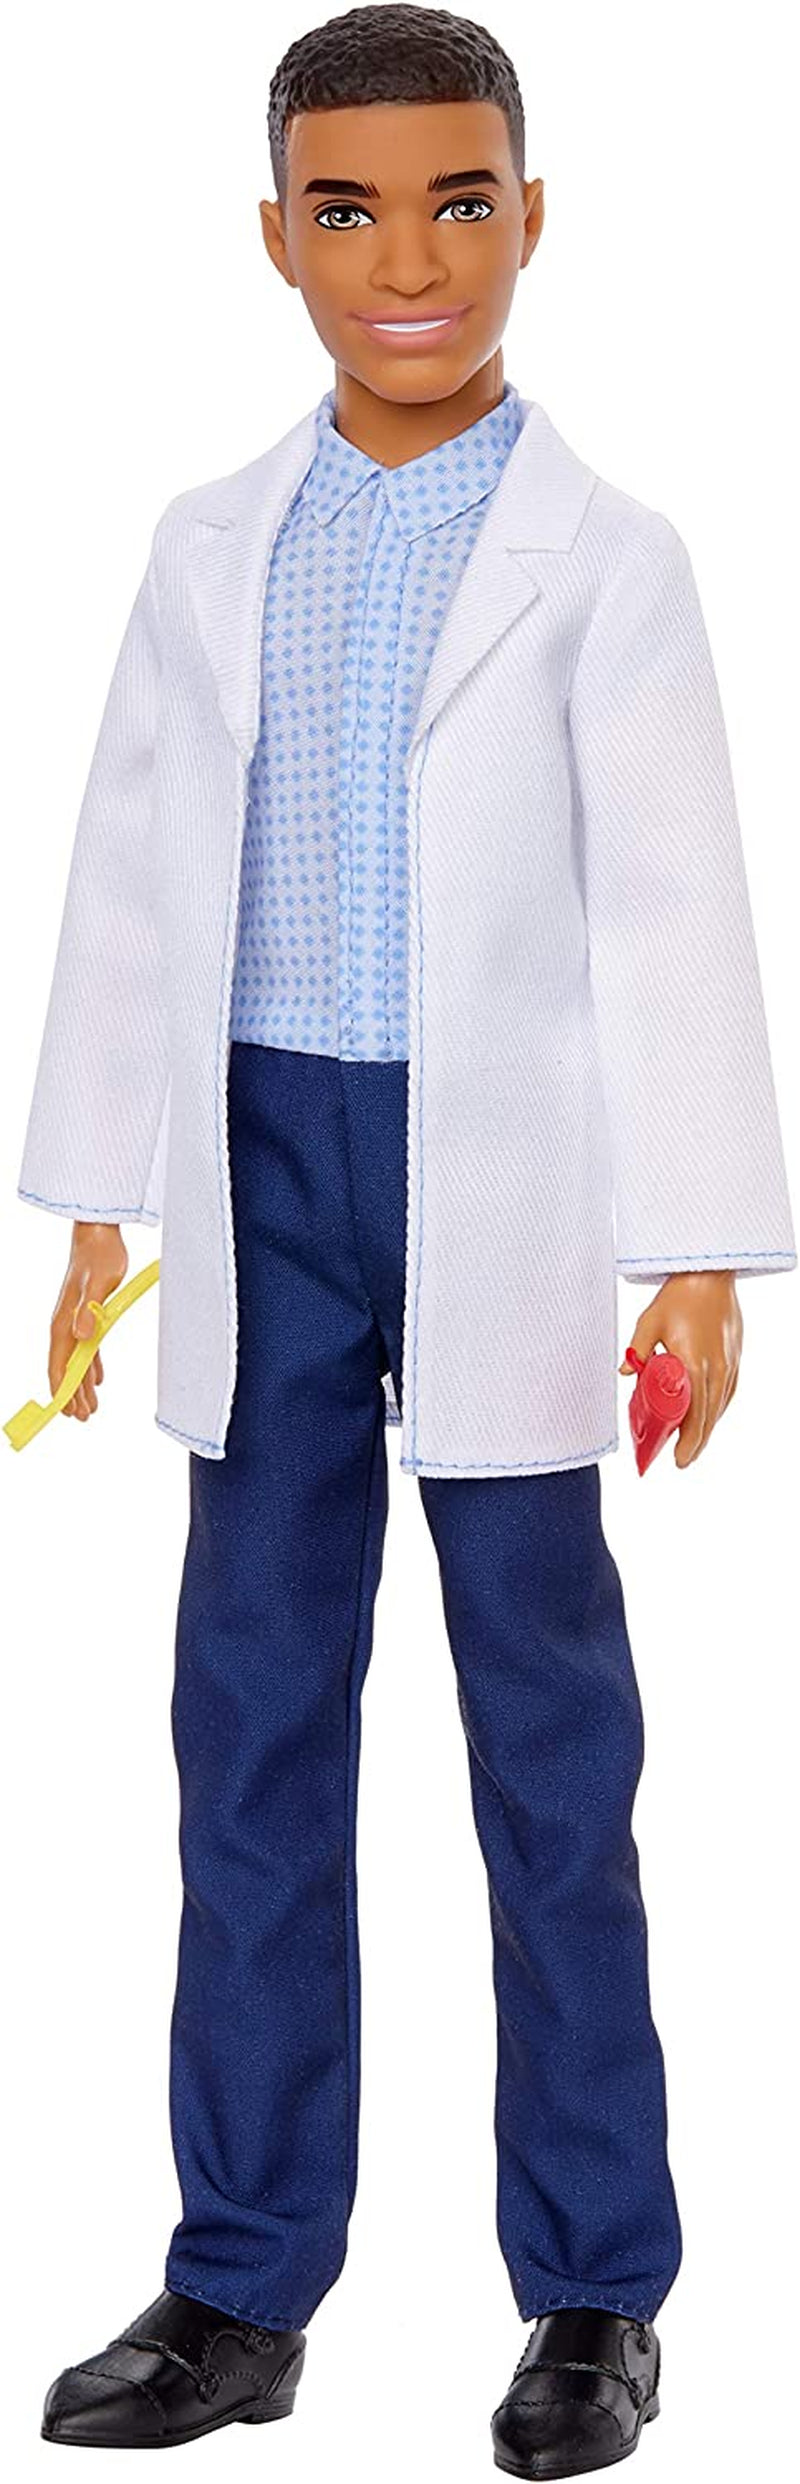 Ken Brunette Dentist Doll with Professional Dental Coat plus 2 Dental Toothbrush and Toothpaste Accessories for Ages 3 and Up Sporting Goods > Outdoor Recreation > Winter Sports & Activities Mattel   